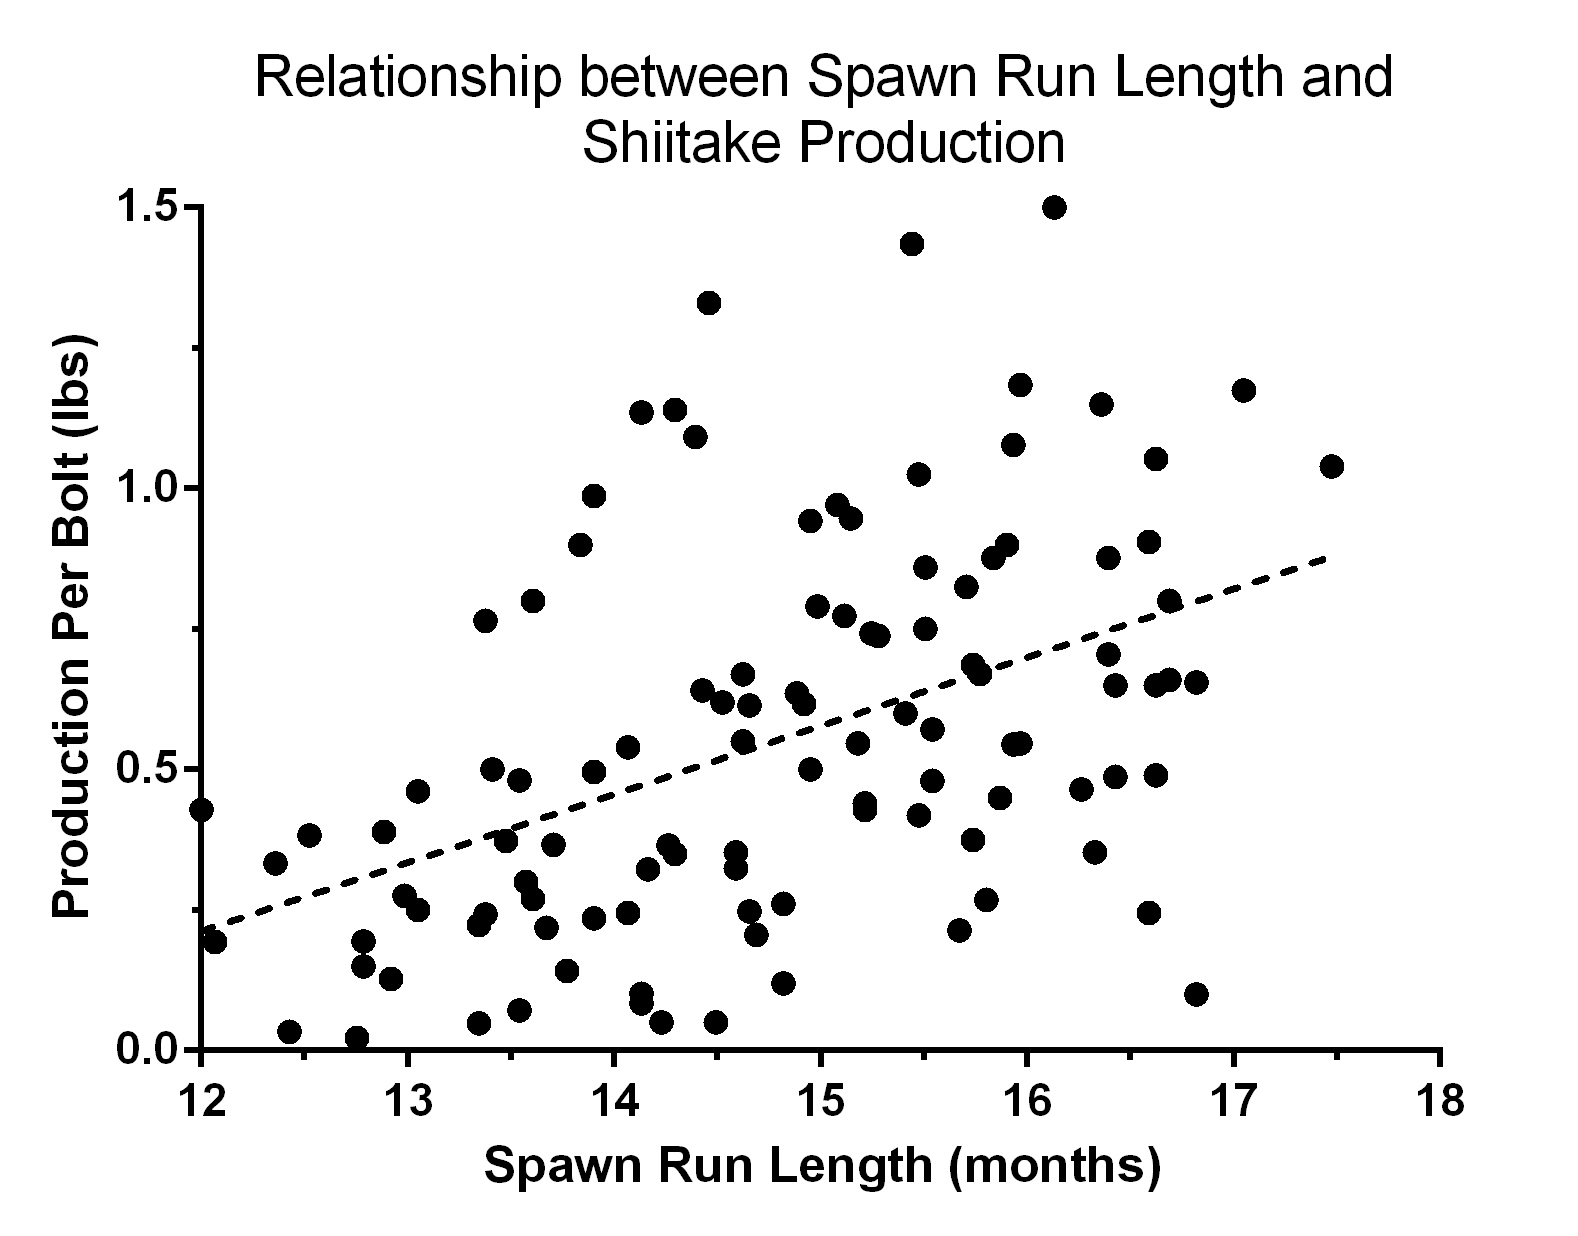 Scatterplot of the relationship between spawn run length and shiitake production. The relationship is positive.